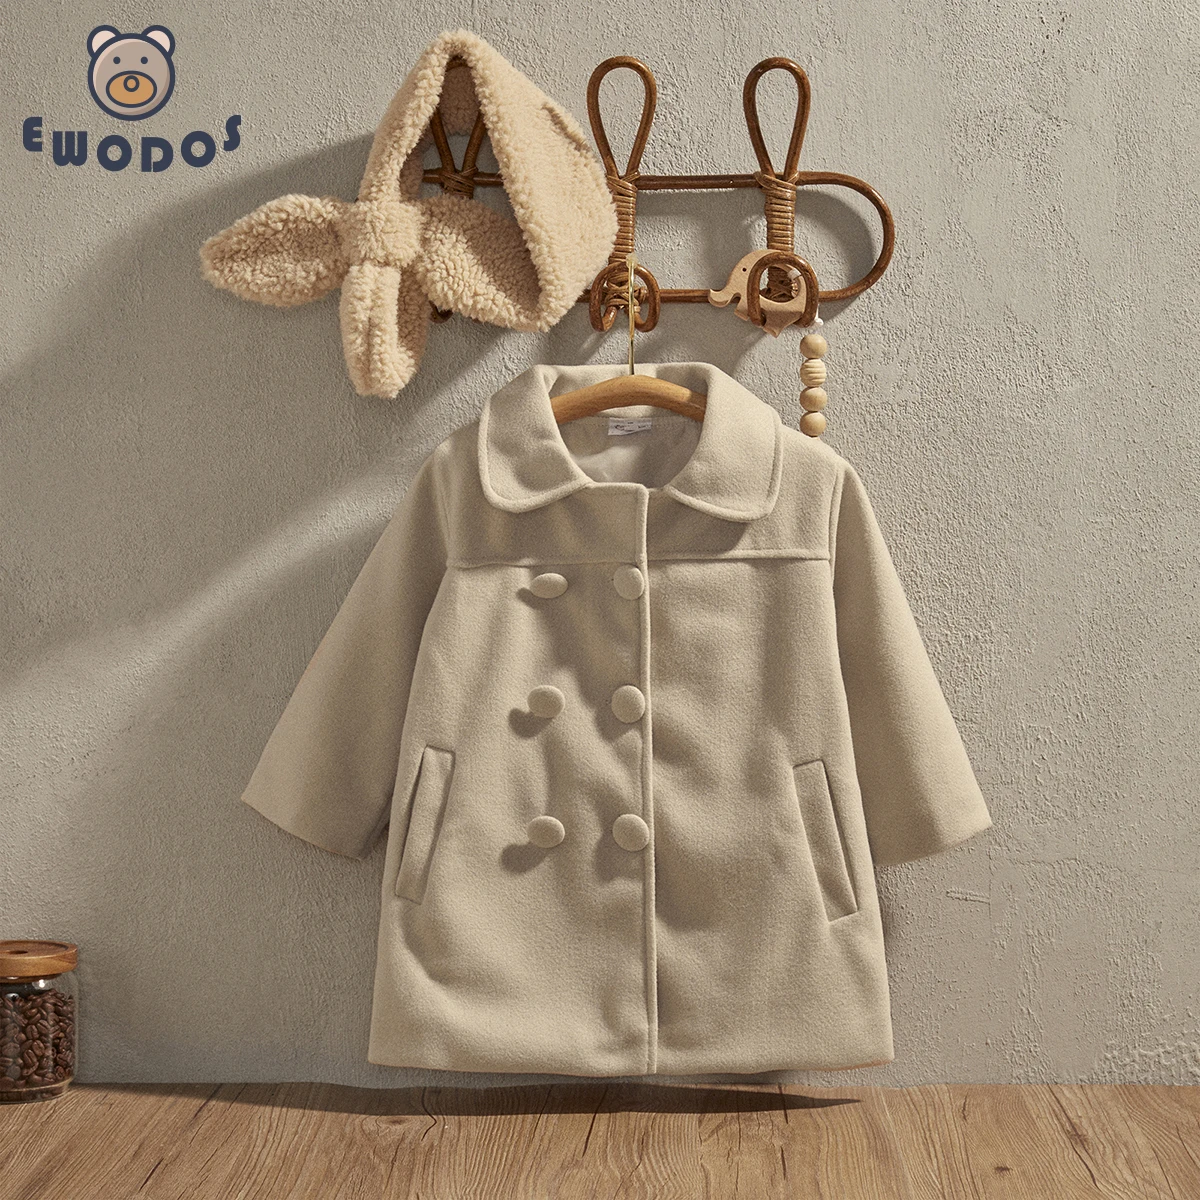 

EWODOS Toddler Baby Girls Winter Fashion Wool Trench Coats Kids Apricot Color Long Sleeve Button Trench Outerwear Warm Jackets